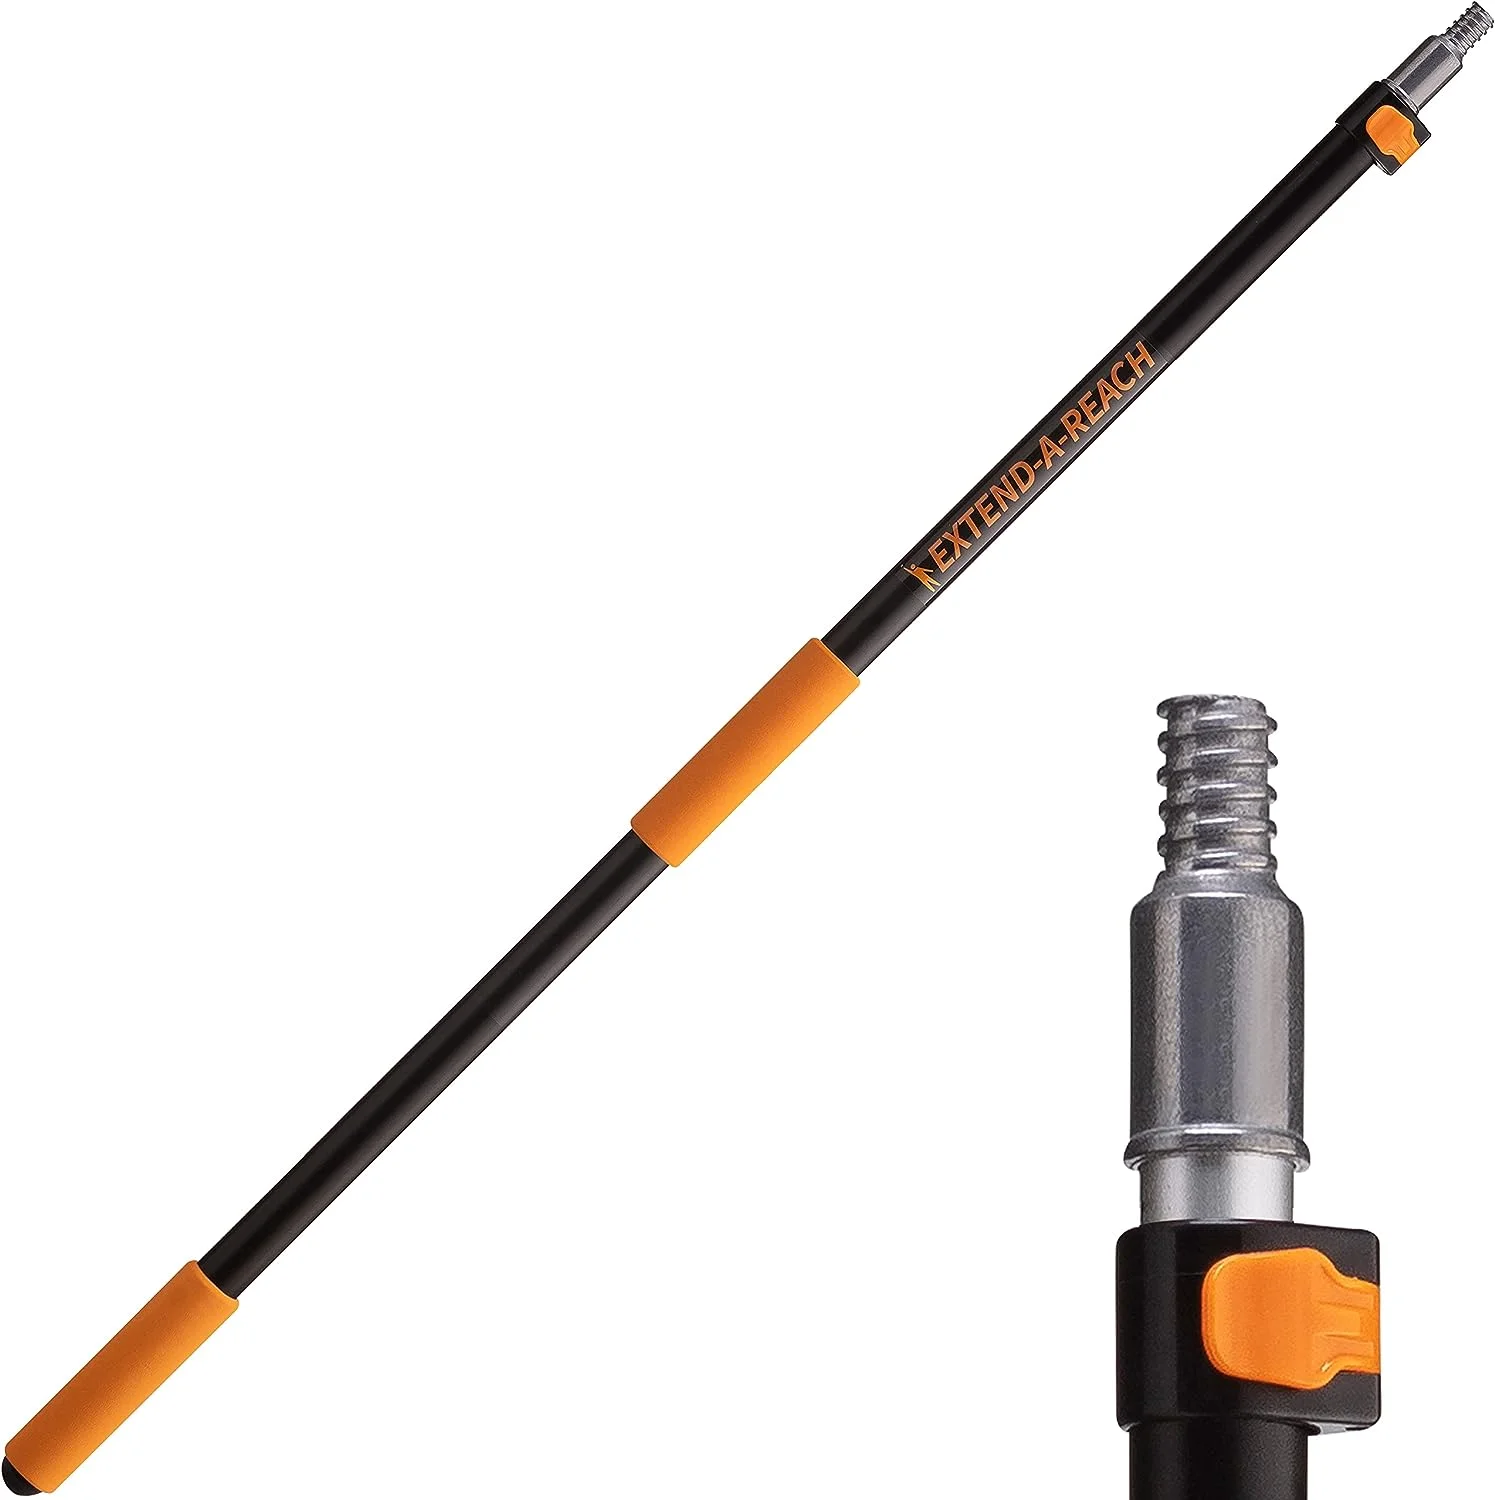 5-8 ft Long Telescopic Extension Pole // Multi-Purpose Extendable Pole with Universal Twist-on Metal Tip // Lightweight and Sturdy // Best Telescoping Pole for Painting, Dusting and Window Cleaning